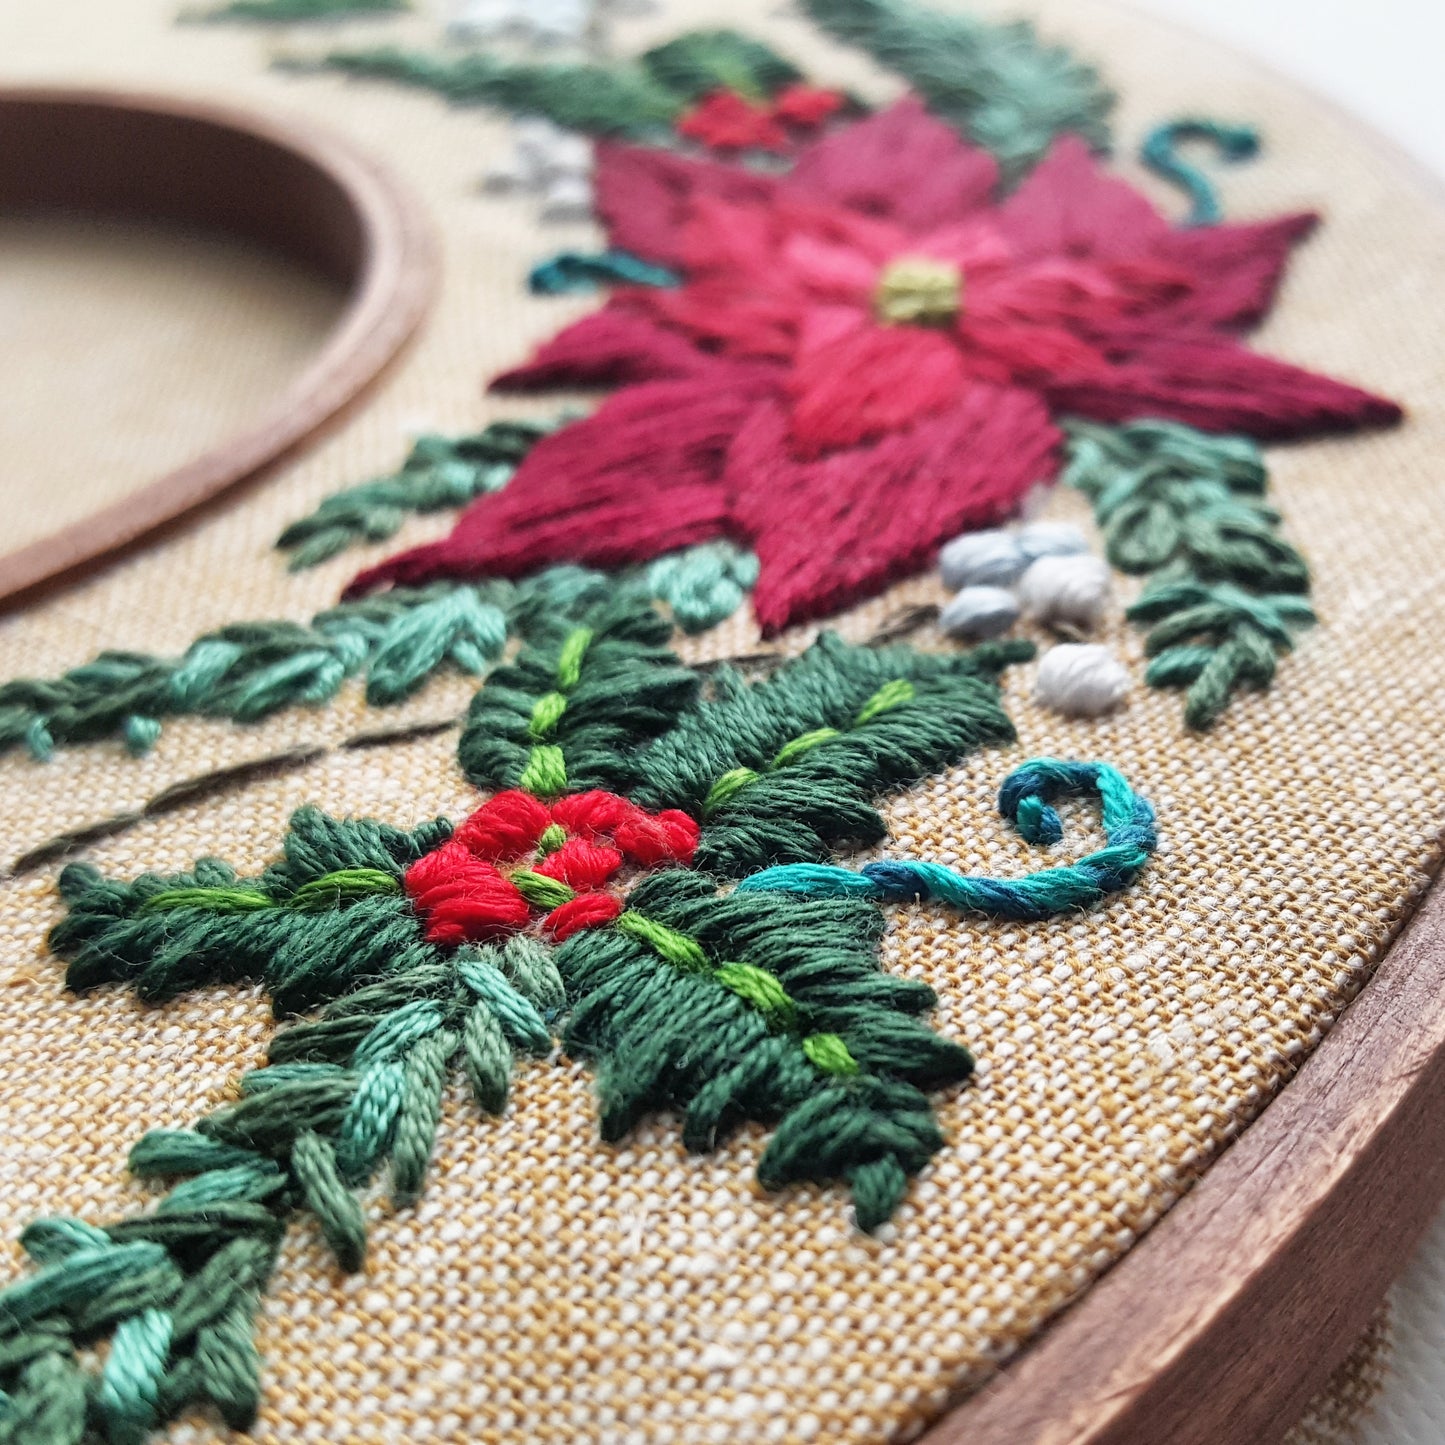 Holiday Wreath Embroidery Kit